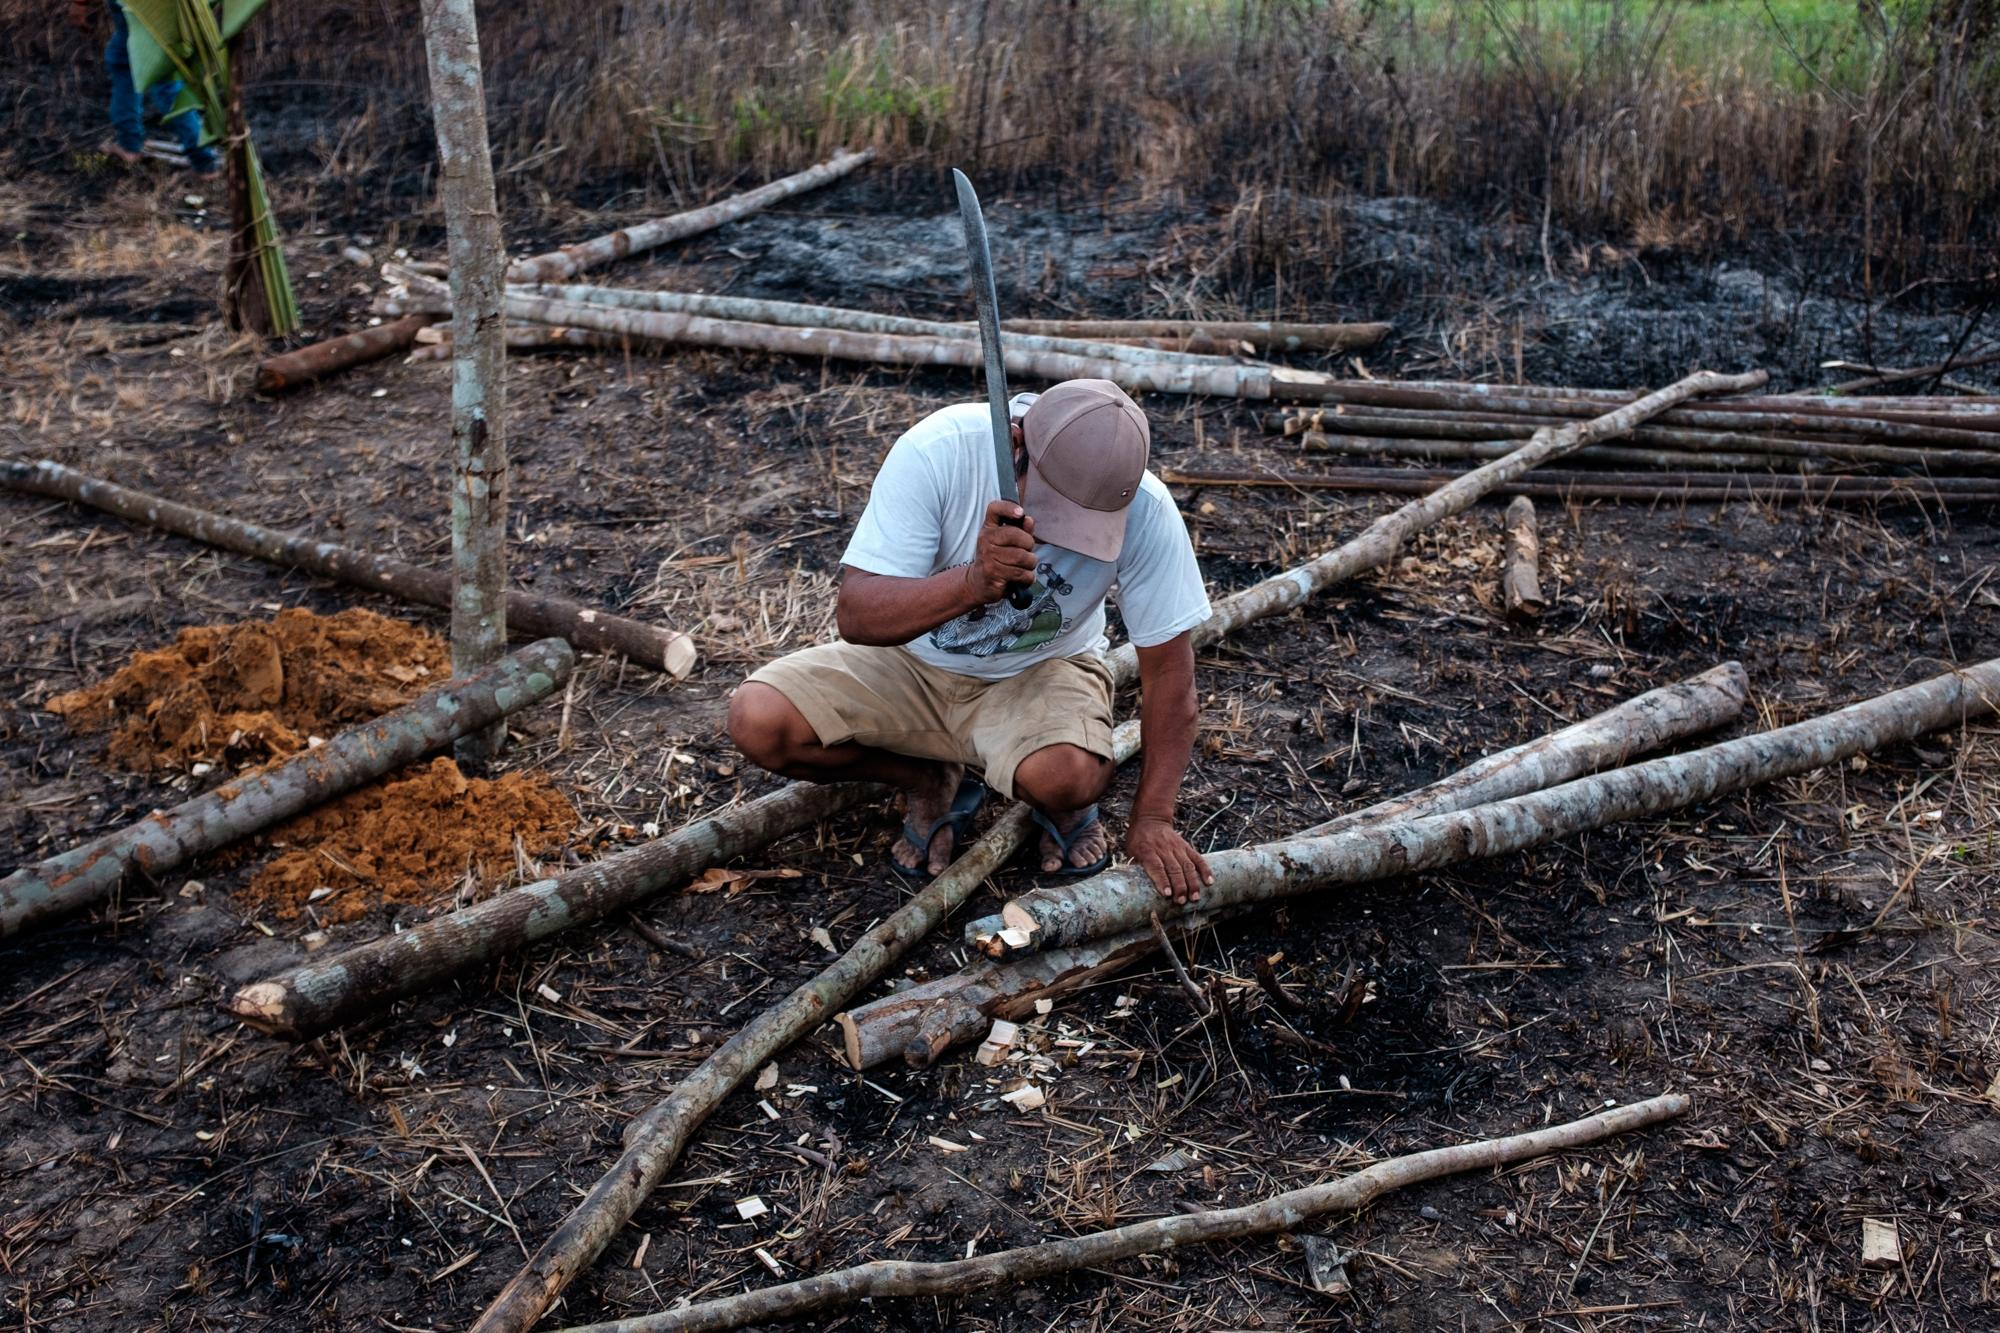 The Last Forest - A member of the Ka'apor Self-Defence Guard cuts wood for...